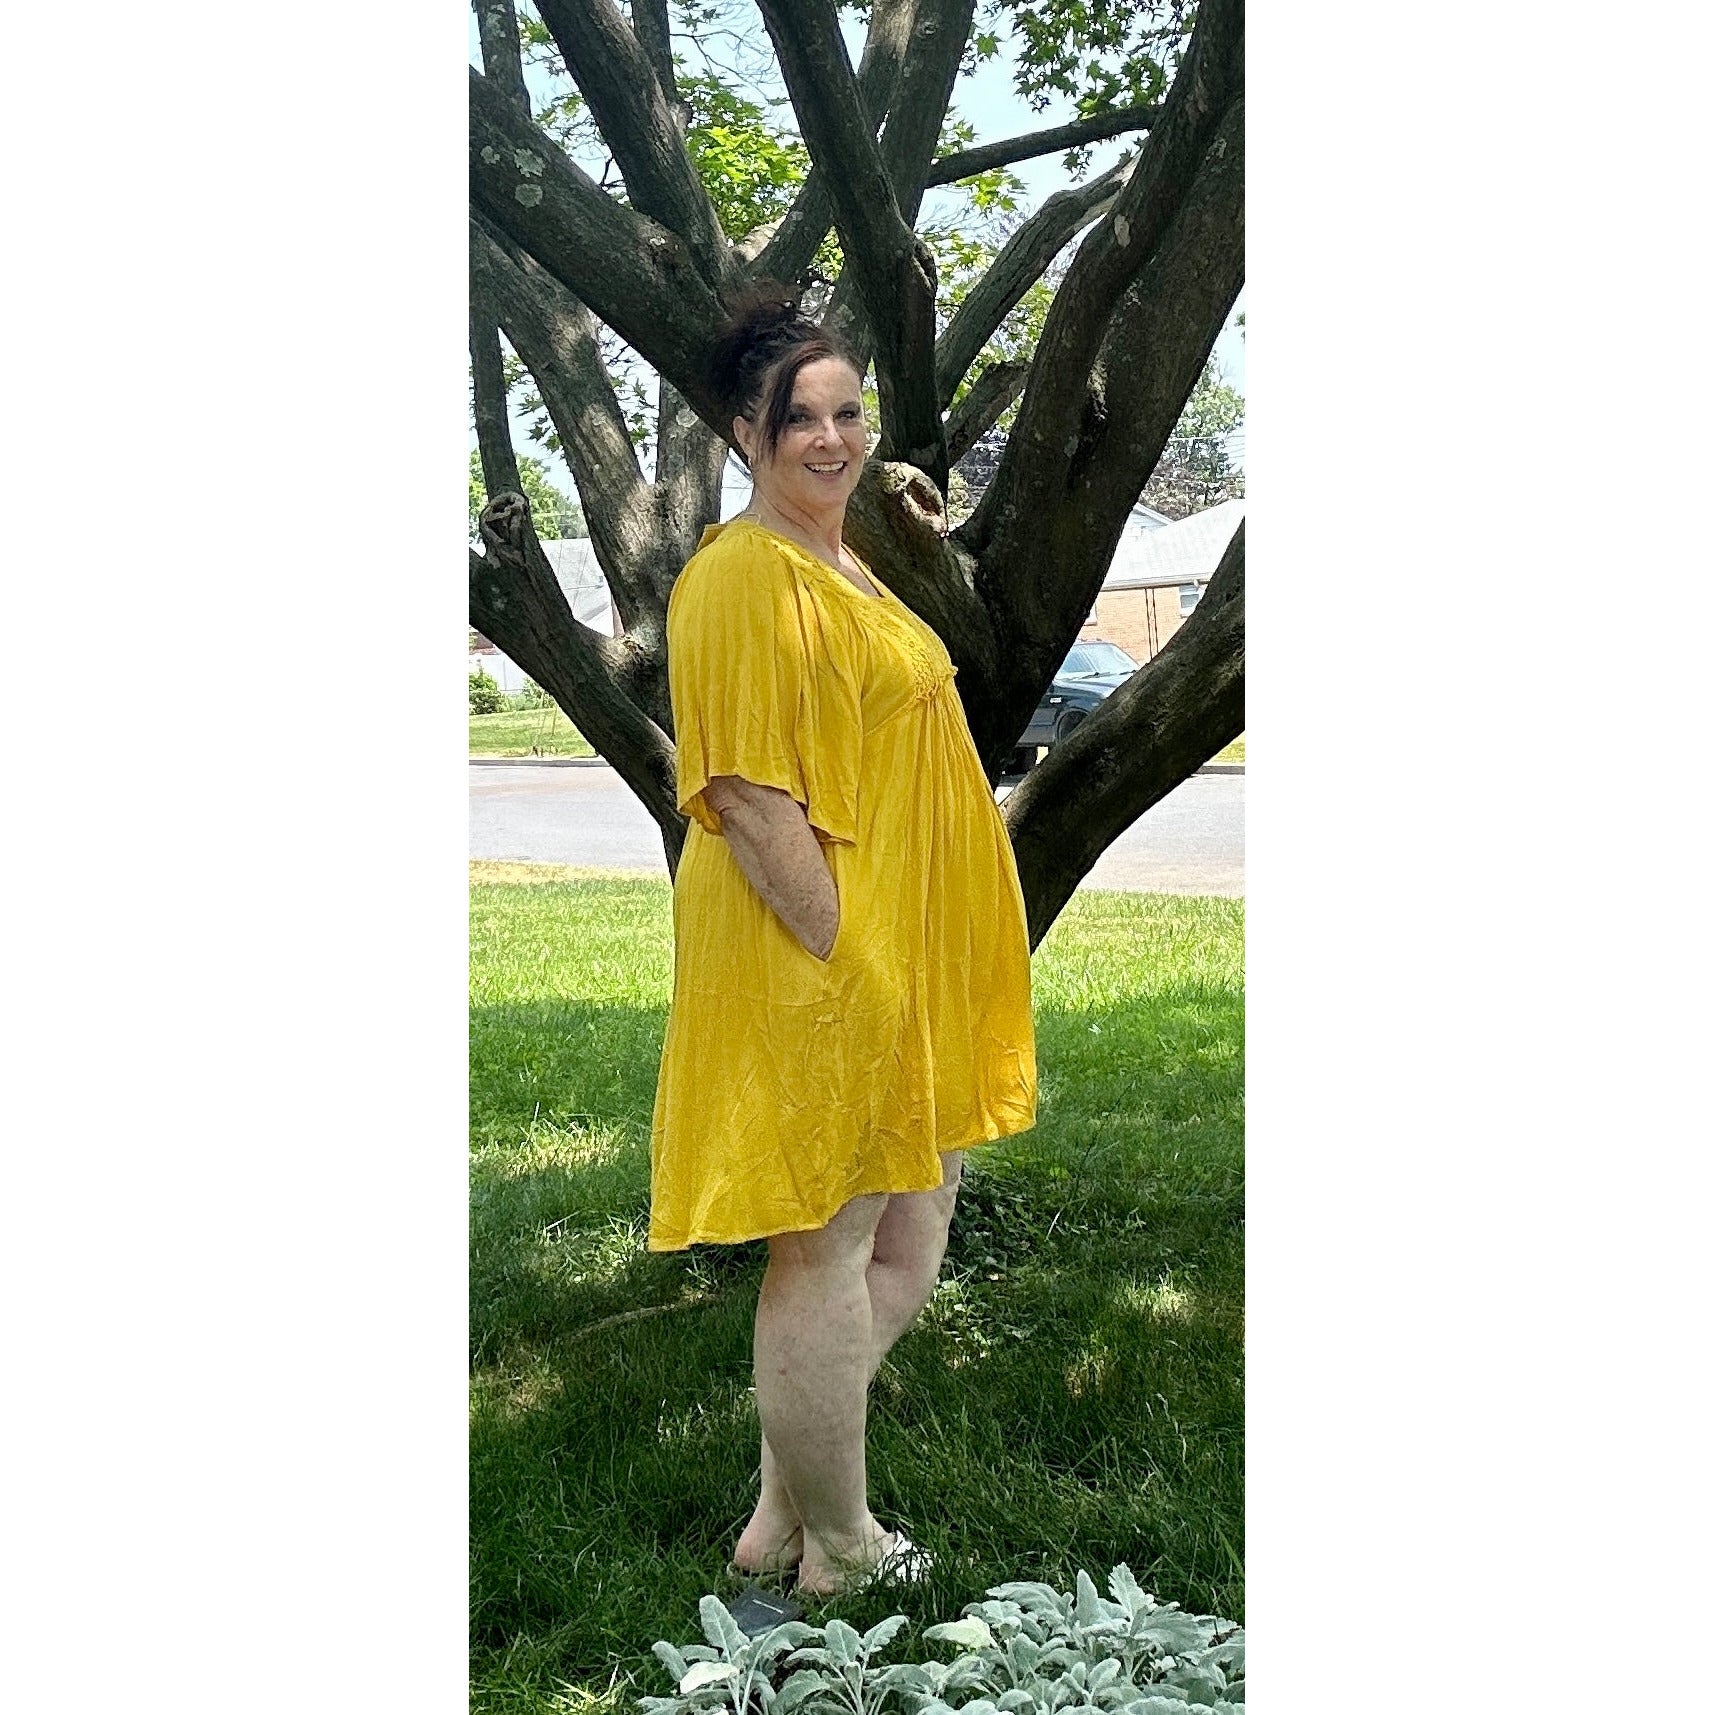 Amy Golden Yellow Lace Dress - Rhapsody and Renascence